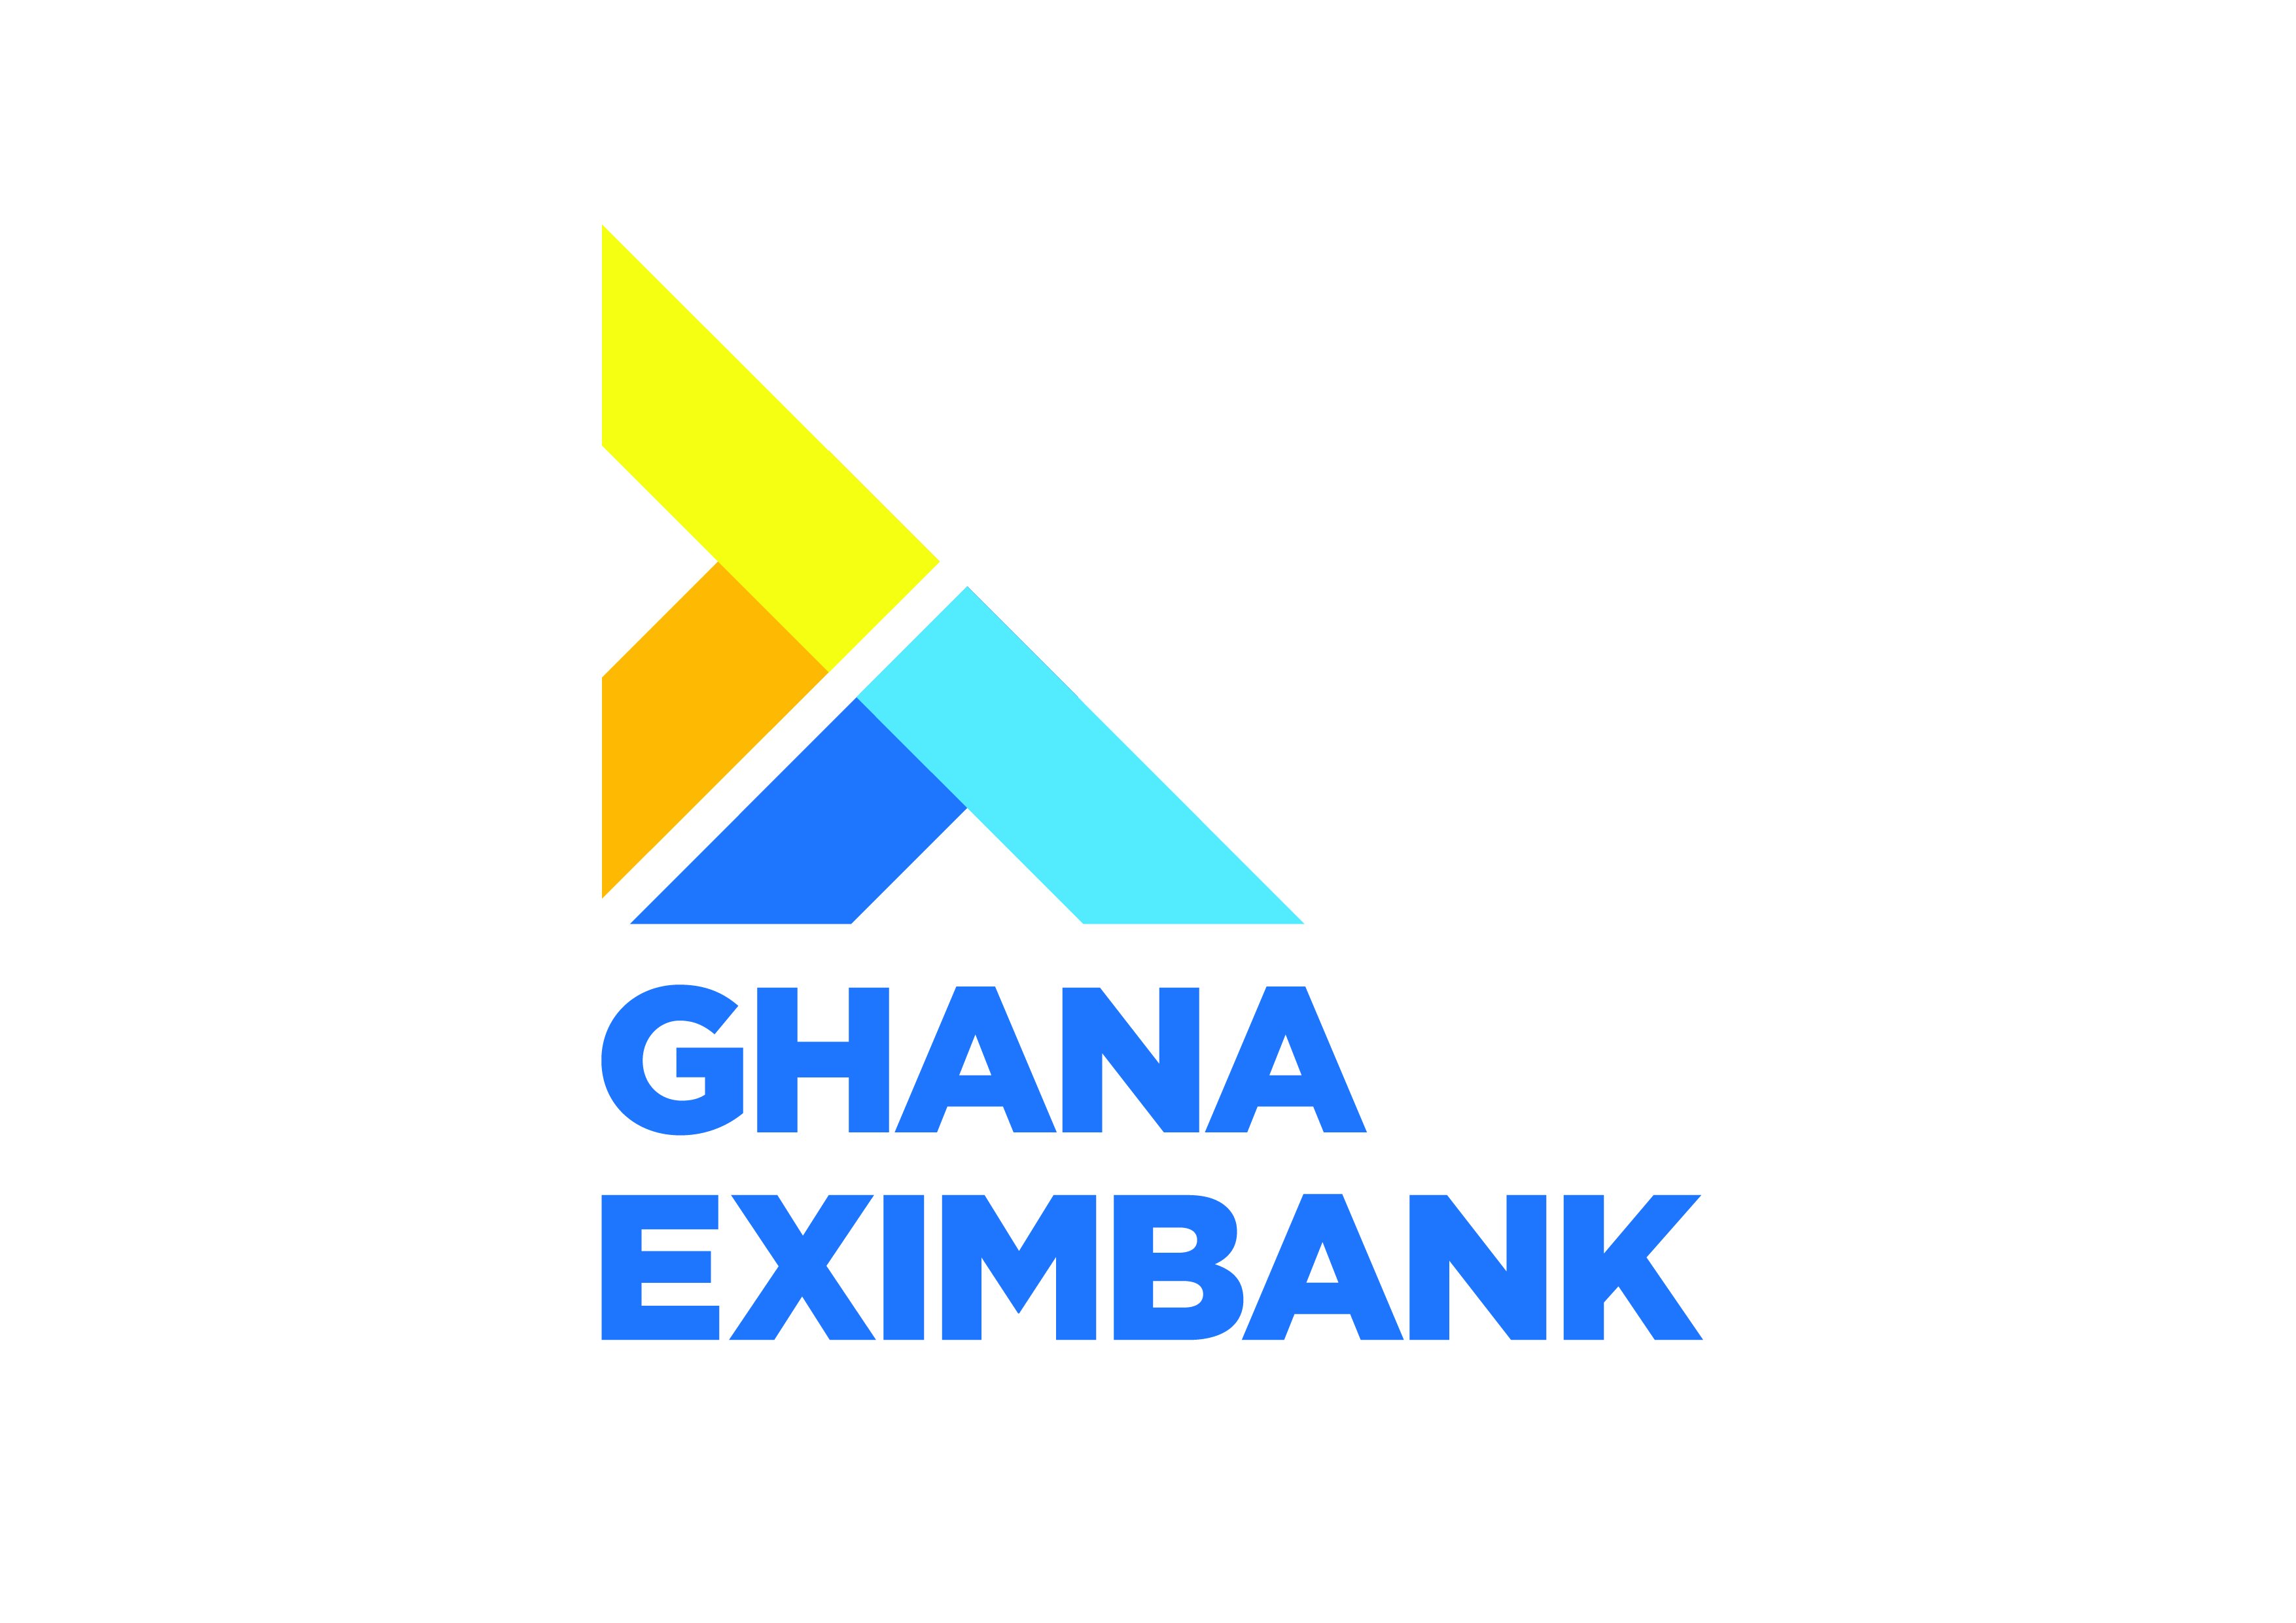 Official Twitter Feed of Ghana's Export Credit Agency established in January 2016 to facilitate Ghana's intra and extra-Africa trade. #GEXIM

#gexim